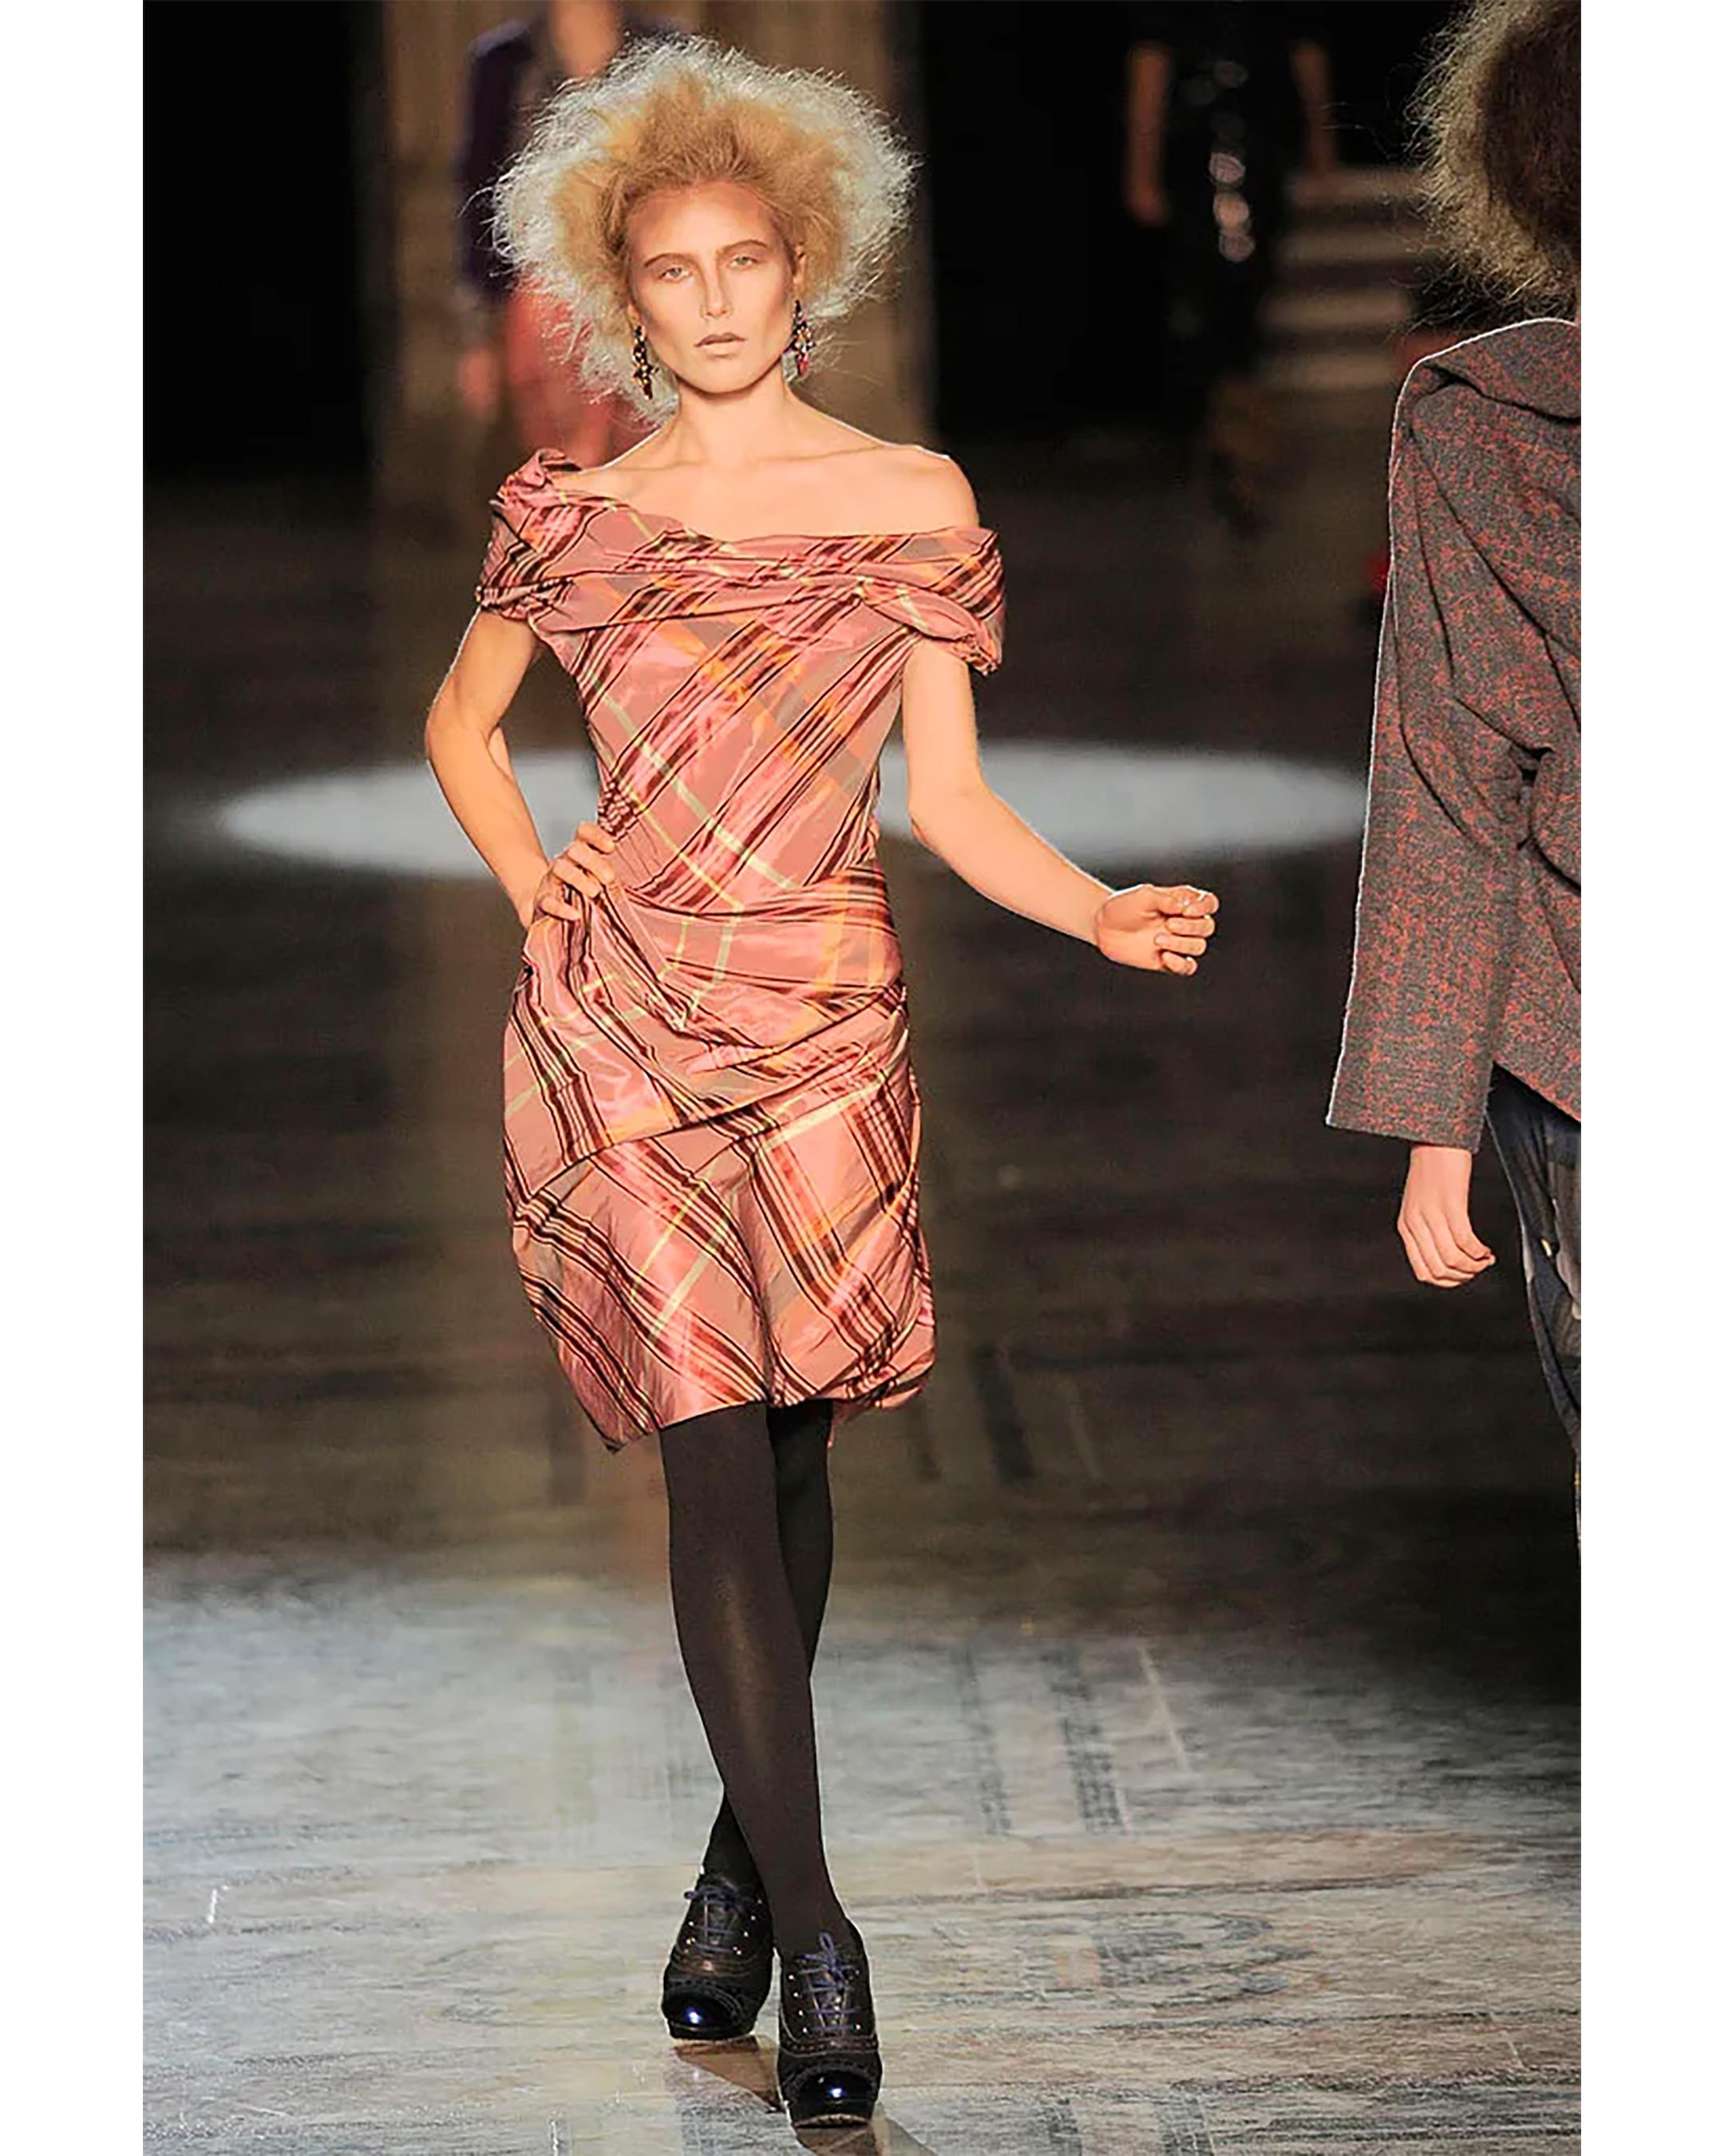 A/W 2010 Vivienne Westwood 'Red Label' blue plaid dress, featuring cream, orange, pink and blue stripe plaid pattern throughout. Fitted waist with signature deconstructed asymmetrical ruched paneling at bust and hips. Sleeveless cowl neck dress with